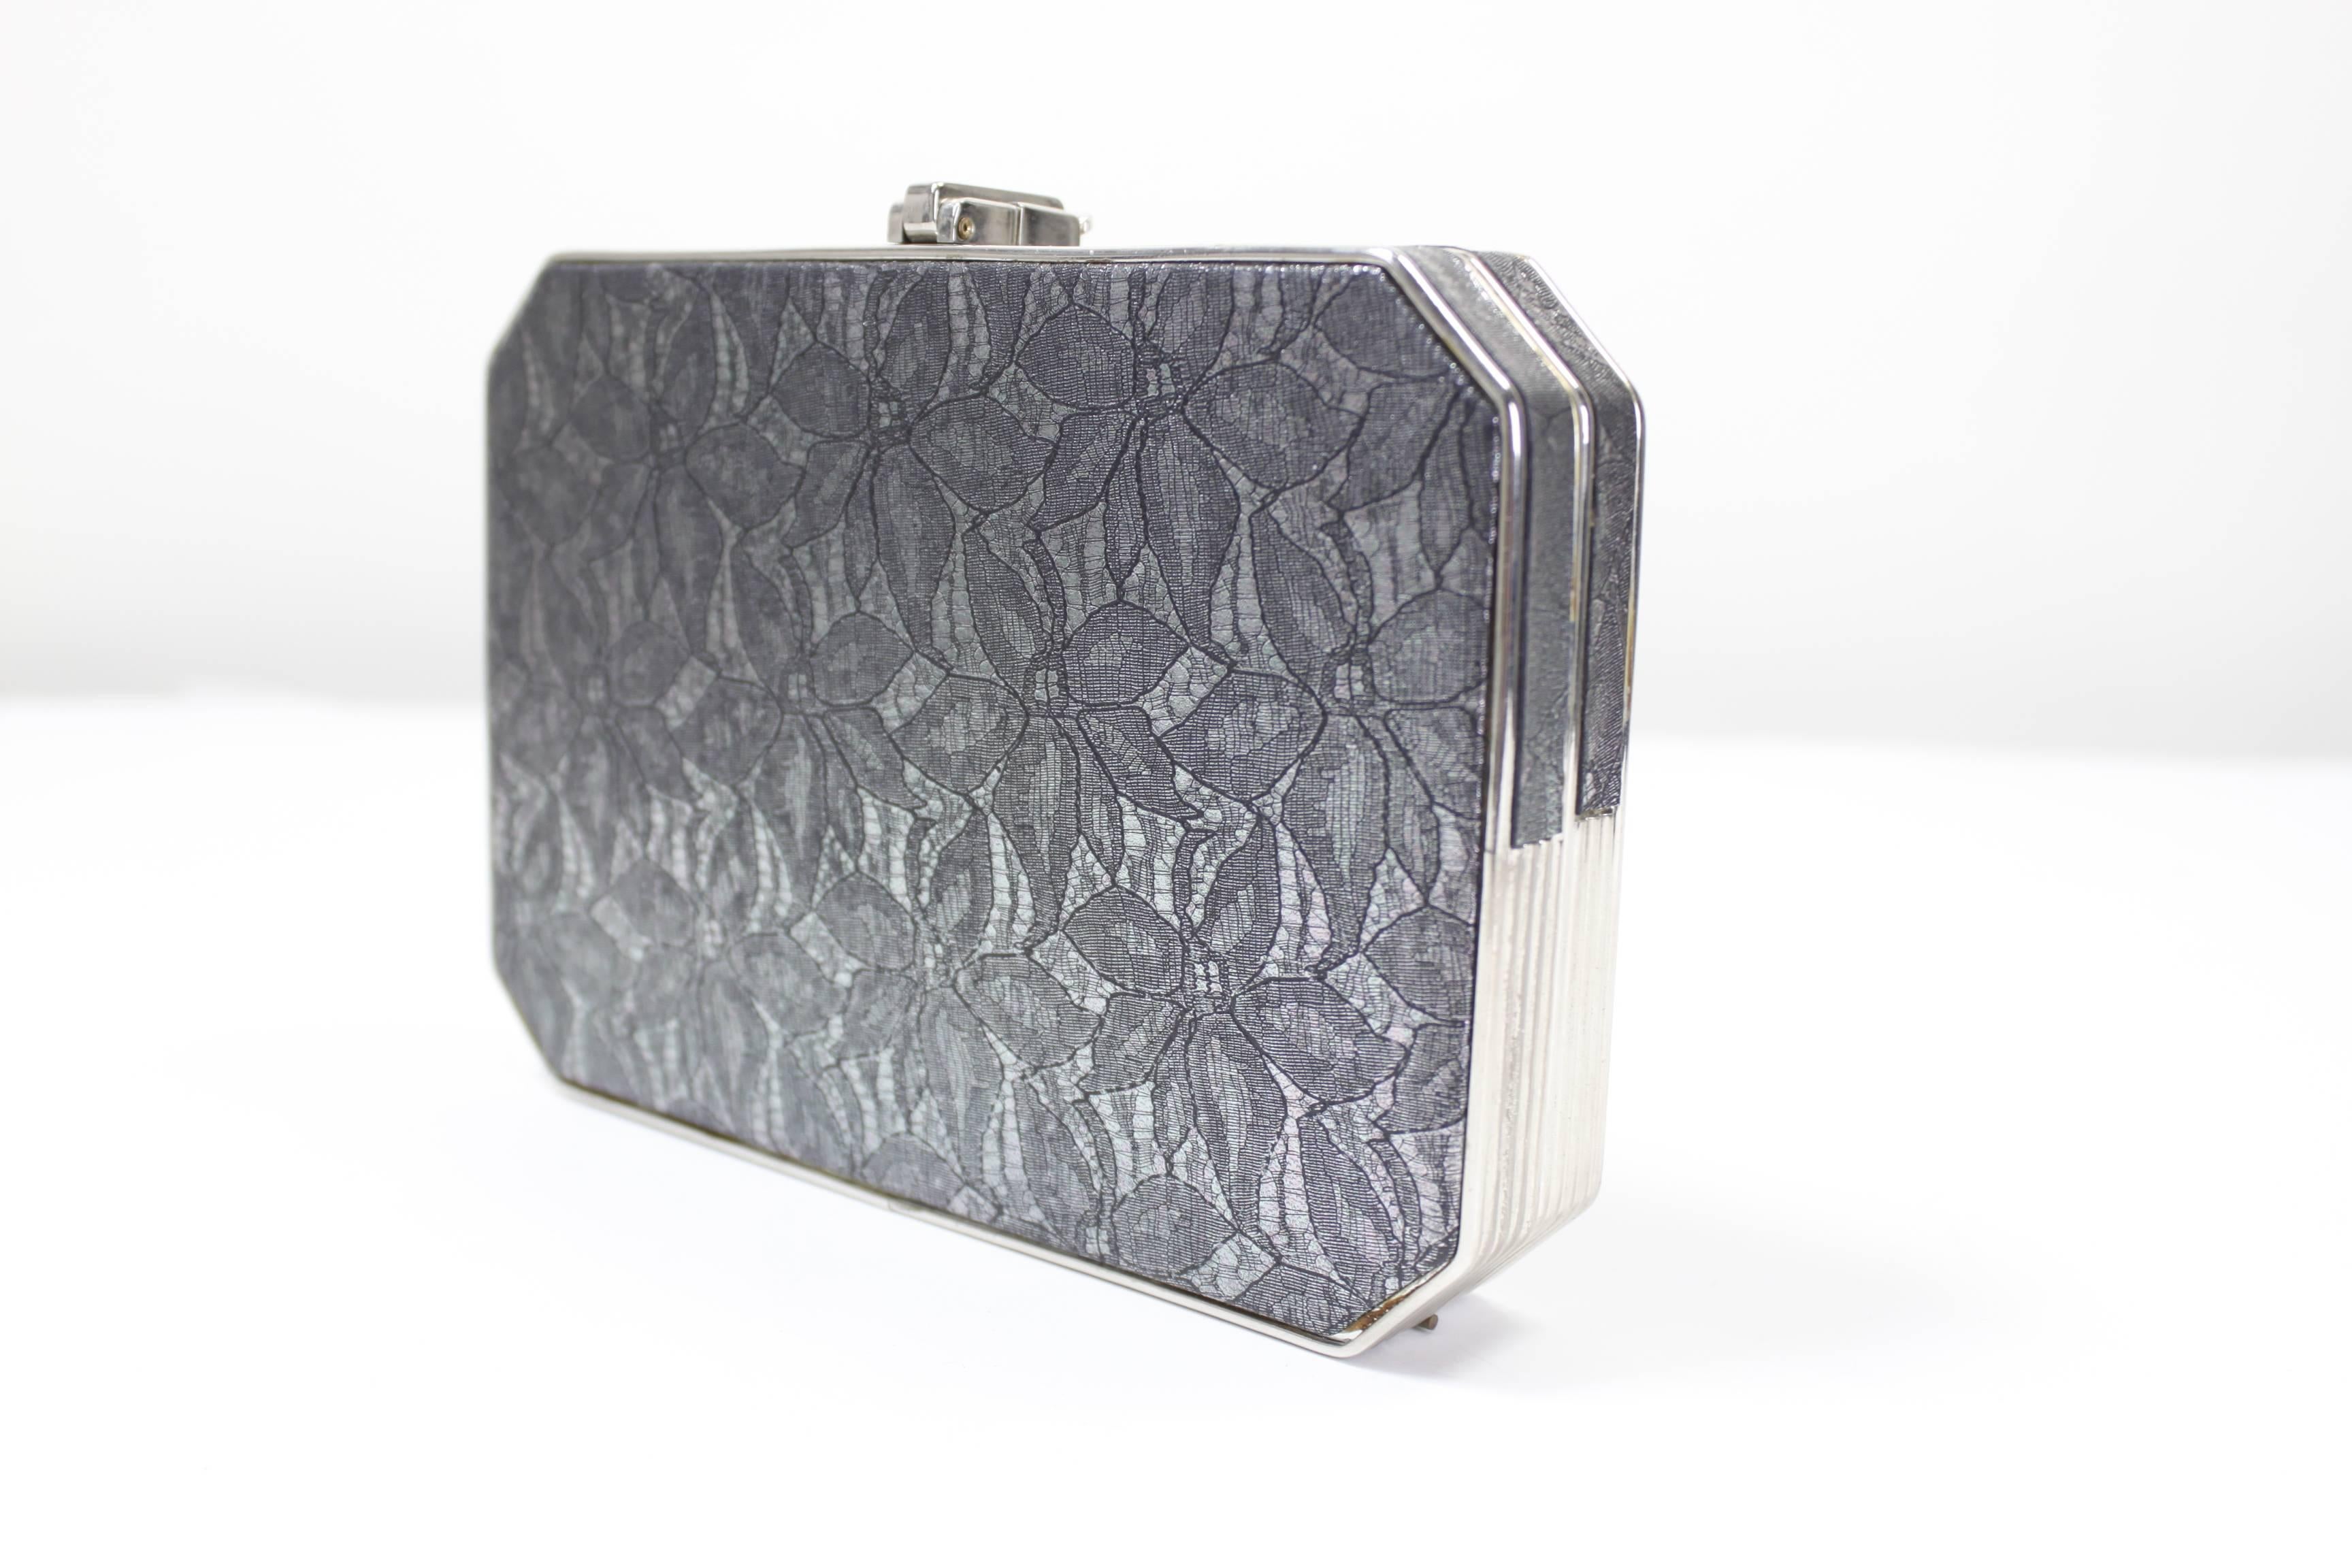 Gray Fendi Silver and Black Lace Evening Clutch with Iridescent Sheen